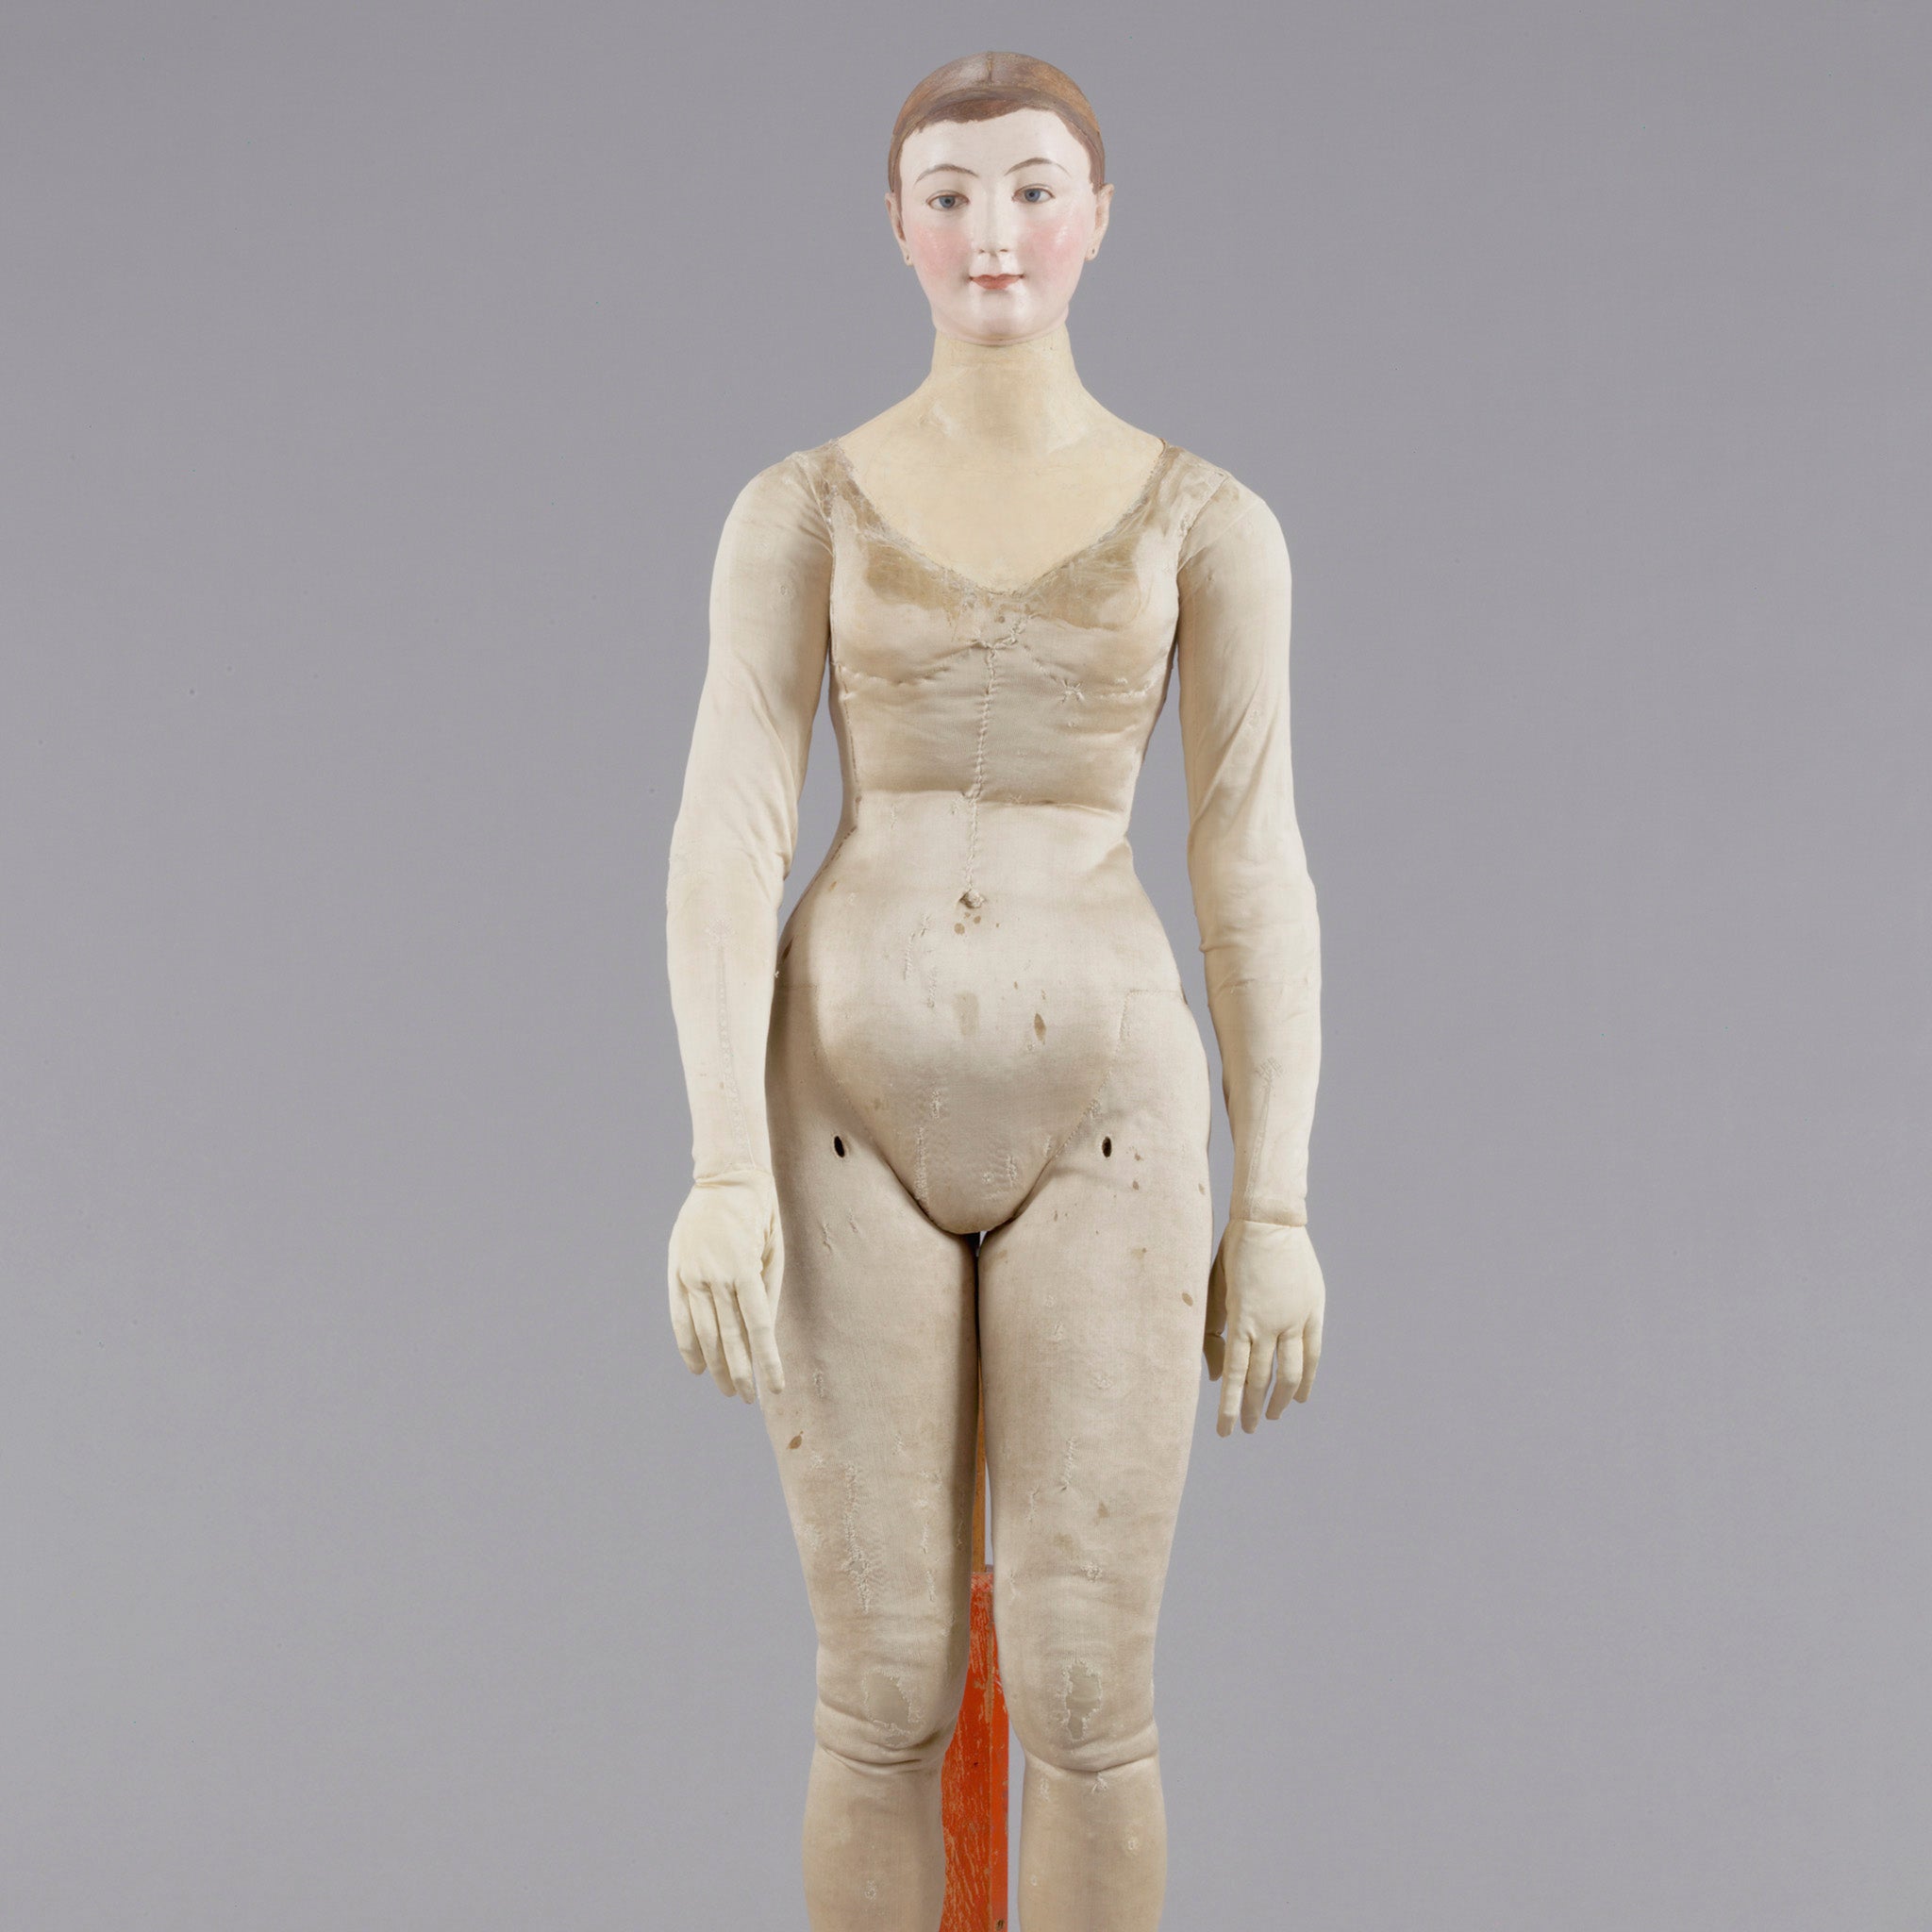 Paul Huot Female Mannequin, c. 1816. Mannequins exhibition at the Fitzwilliam Museum in Cambridge (press image from Lucy Theobald)